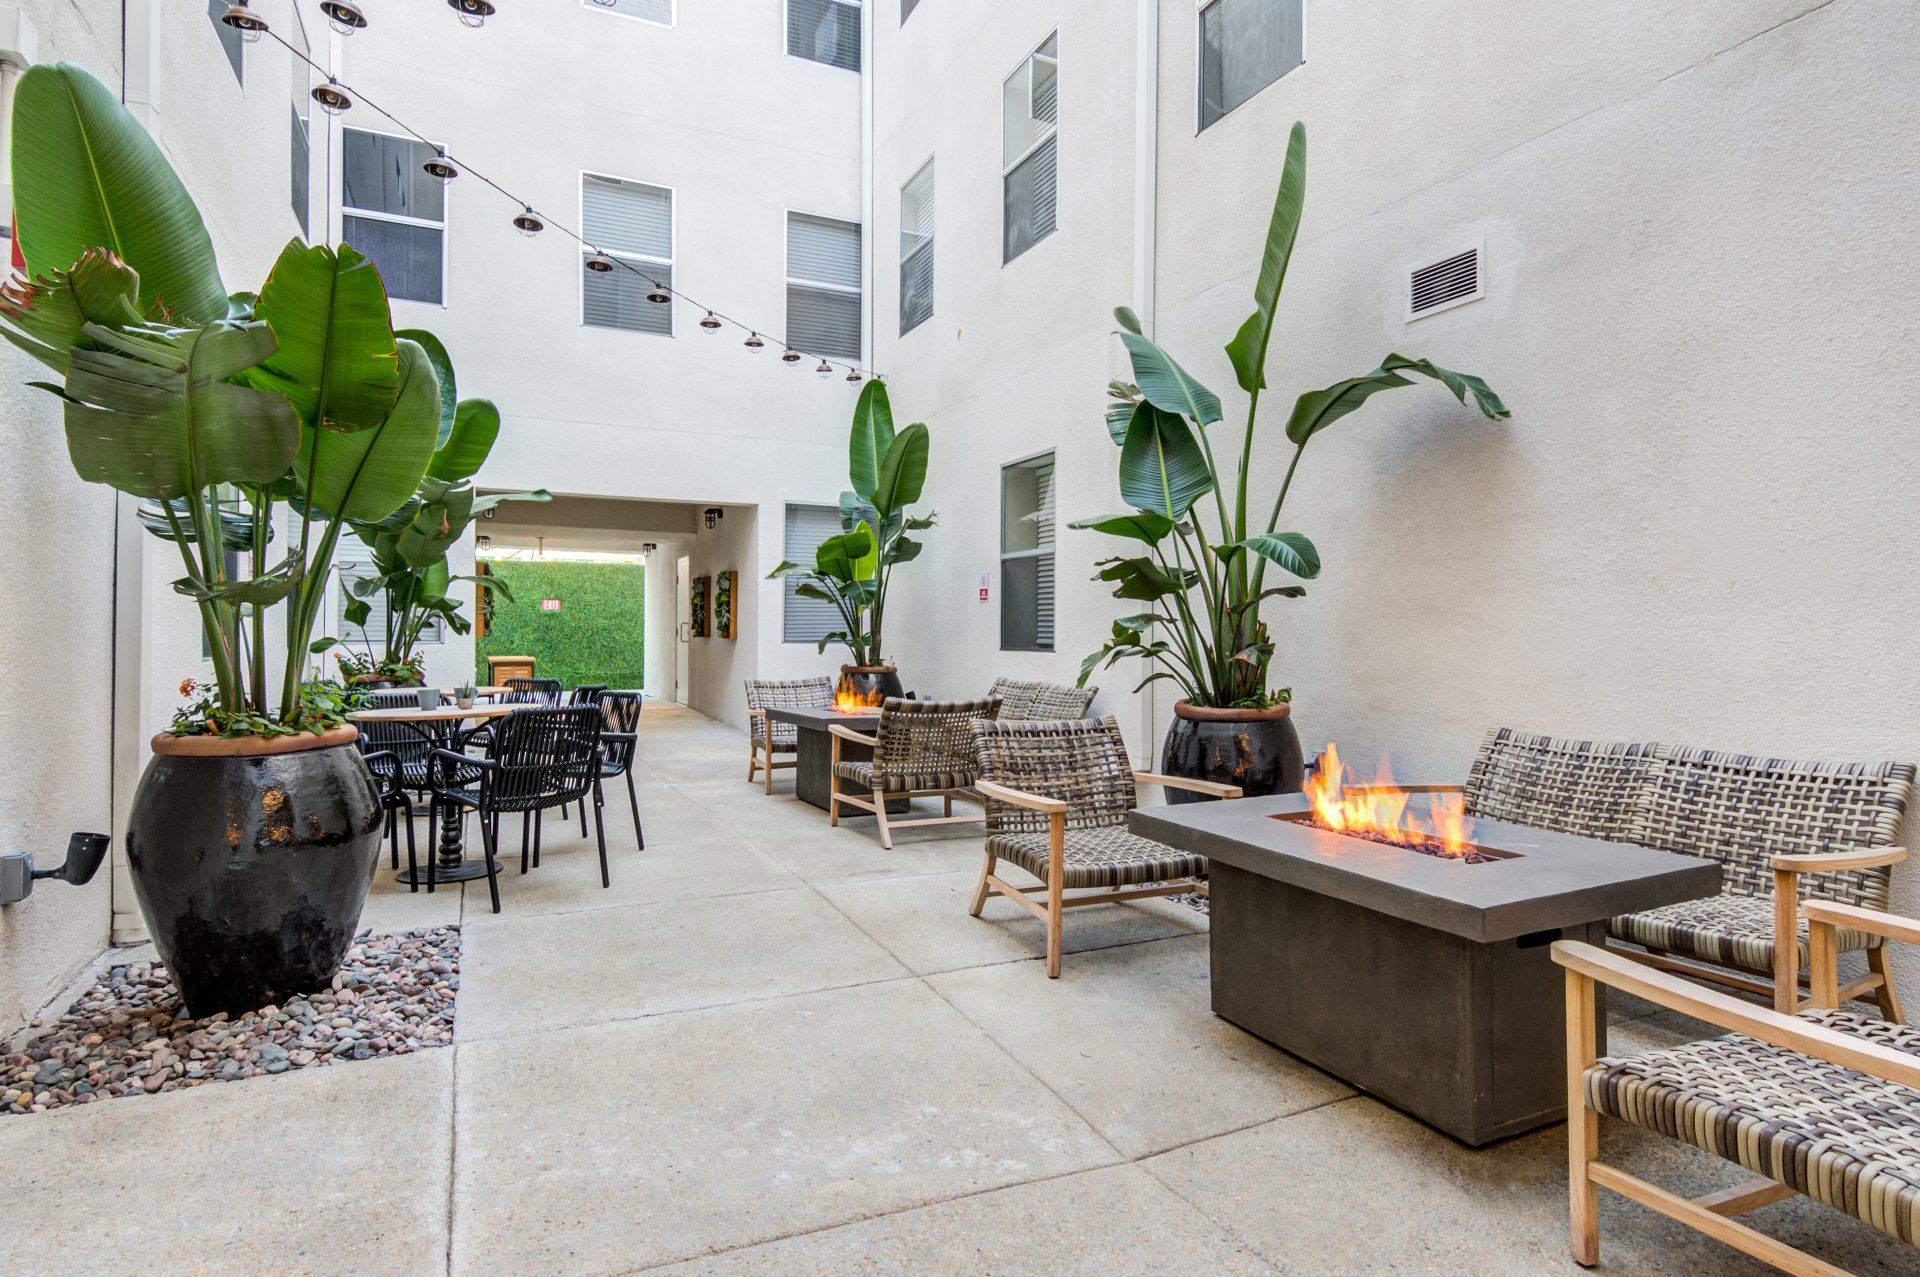 Exterior of community area with fireplaces and luxurious chairs